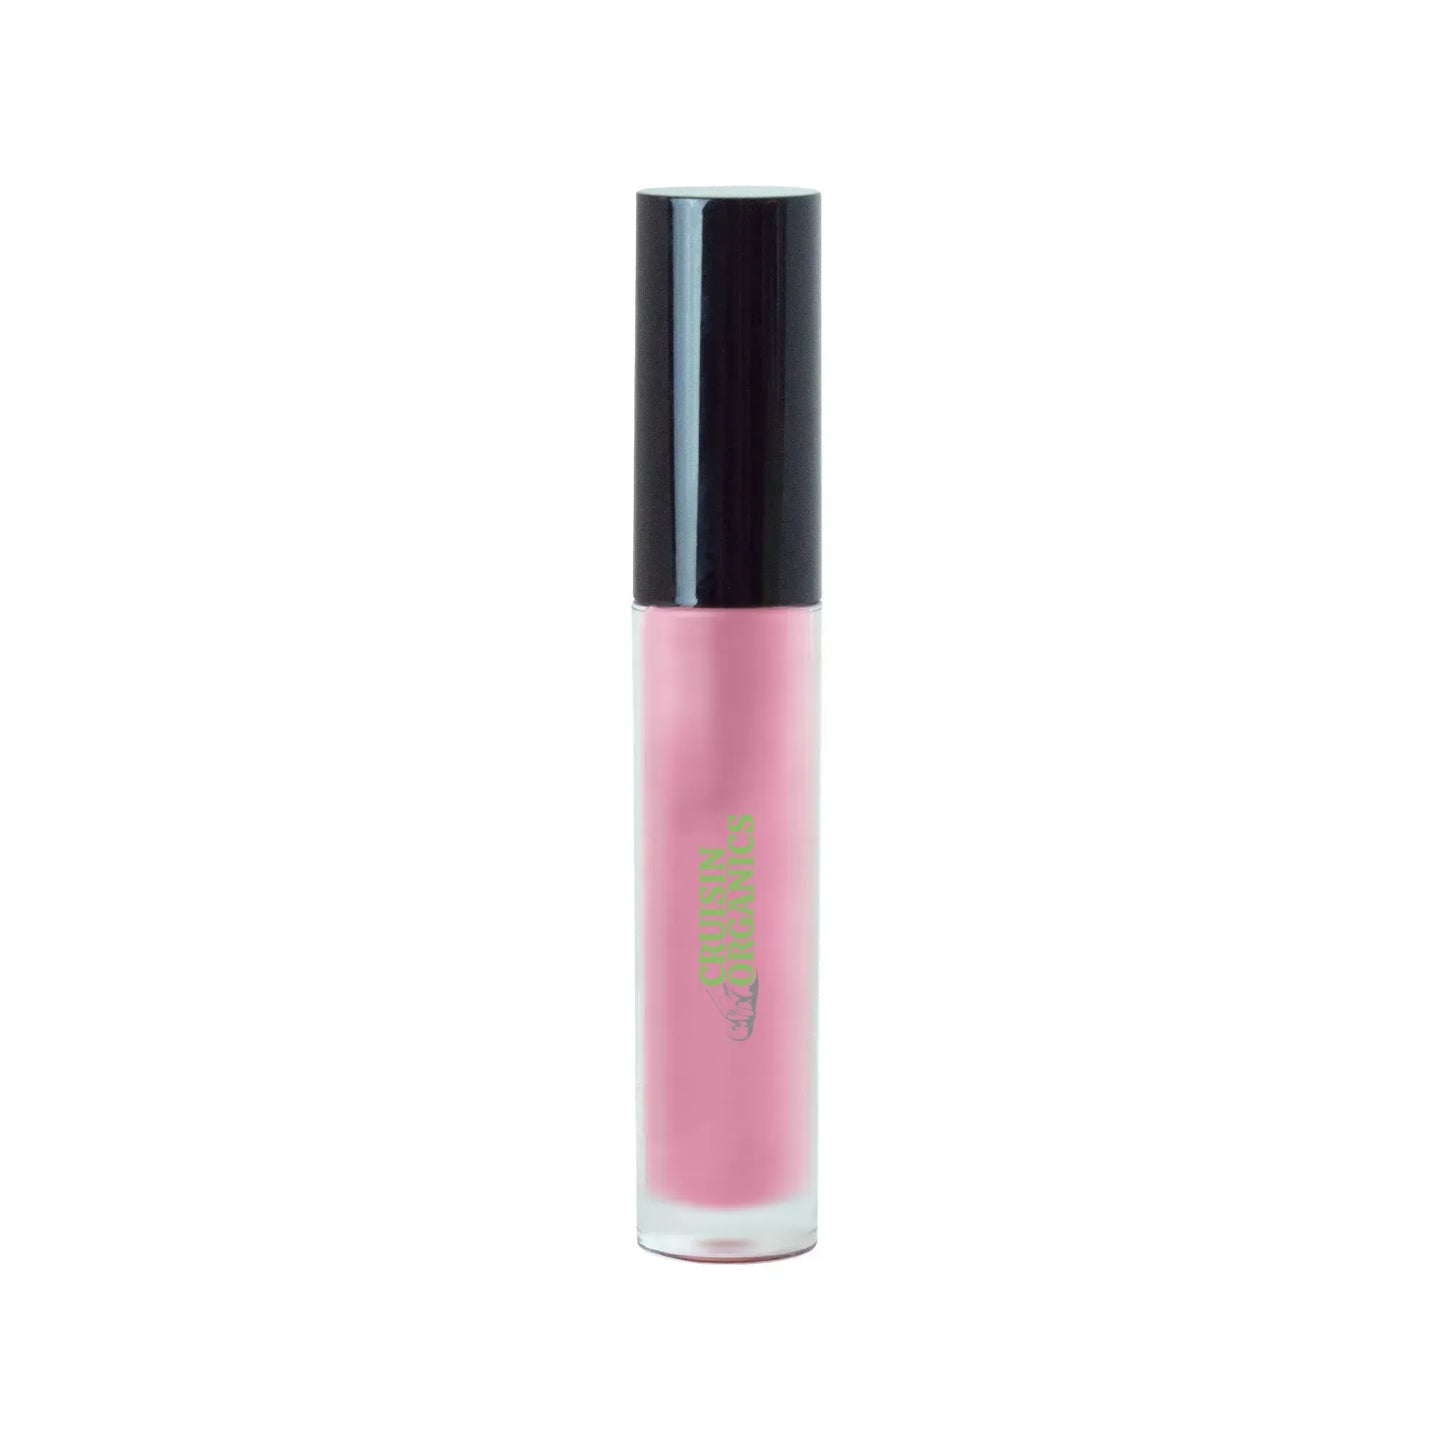  Designed with a pink tint, this lip gloss not only adds a cool luster but also provides essential hydration. Keep your lips looking and feeling great with this must-have product from Cruisin Organics.